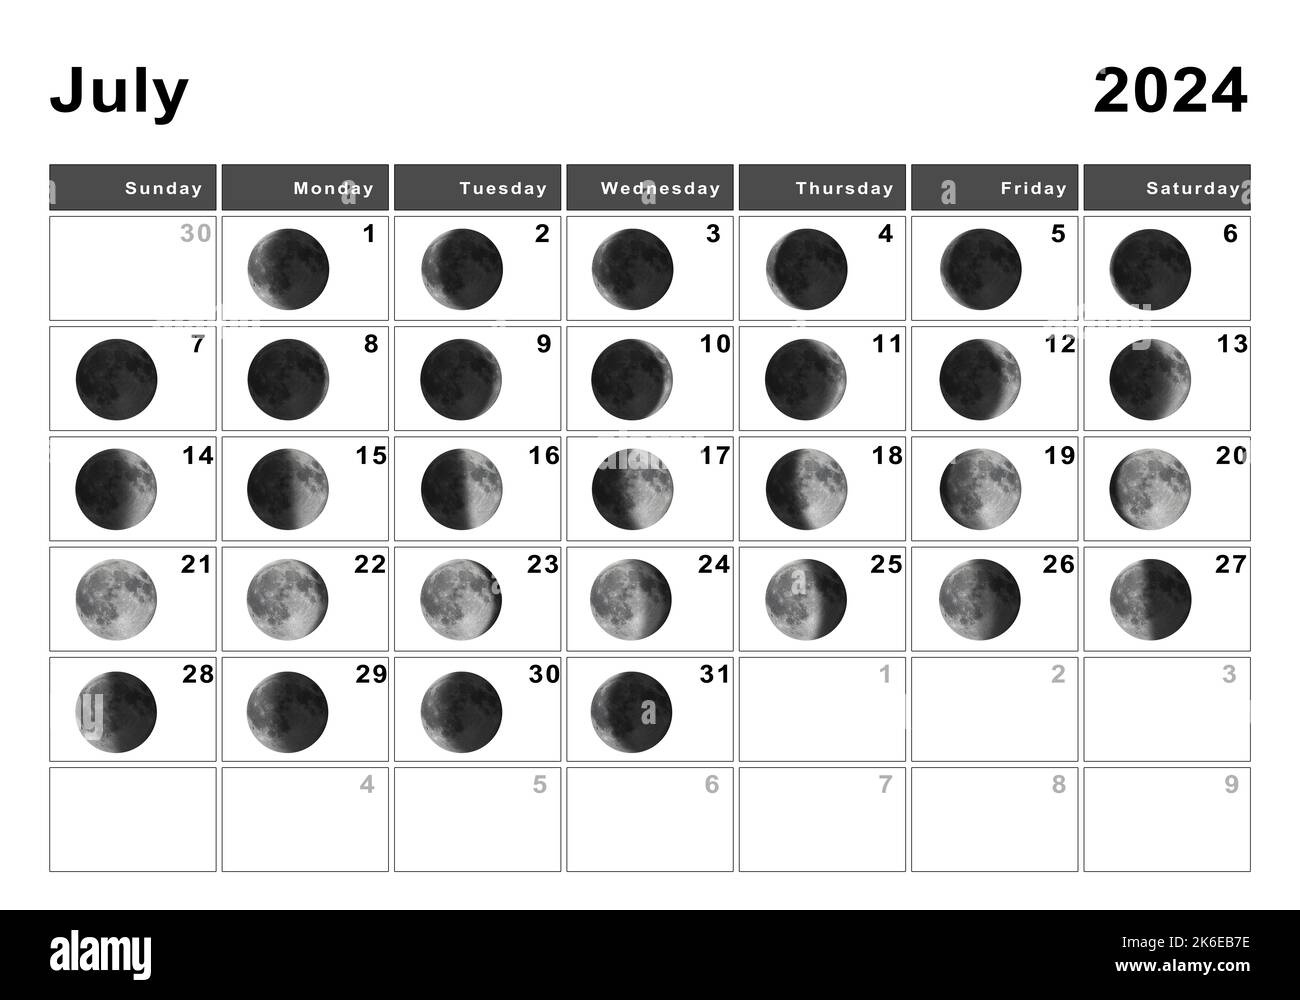 July 2024 Lunar Calendar, Moon Cycles, Moon Phases Stock Photo - Alamy inside July 2024 Calendar With Moon Phases